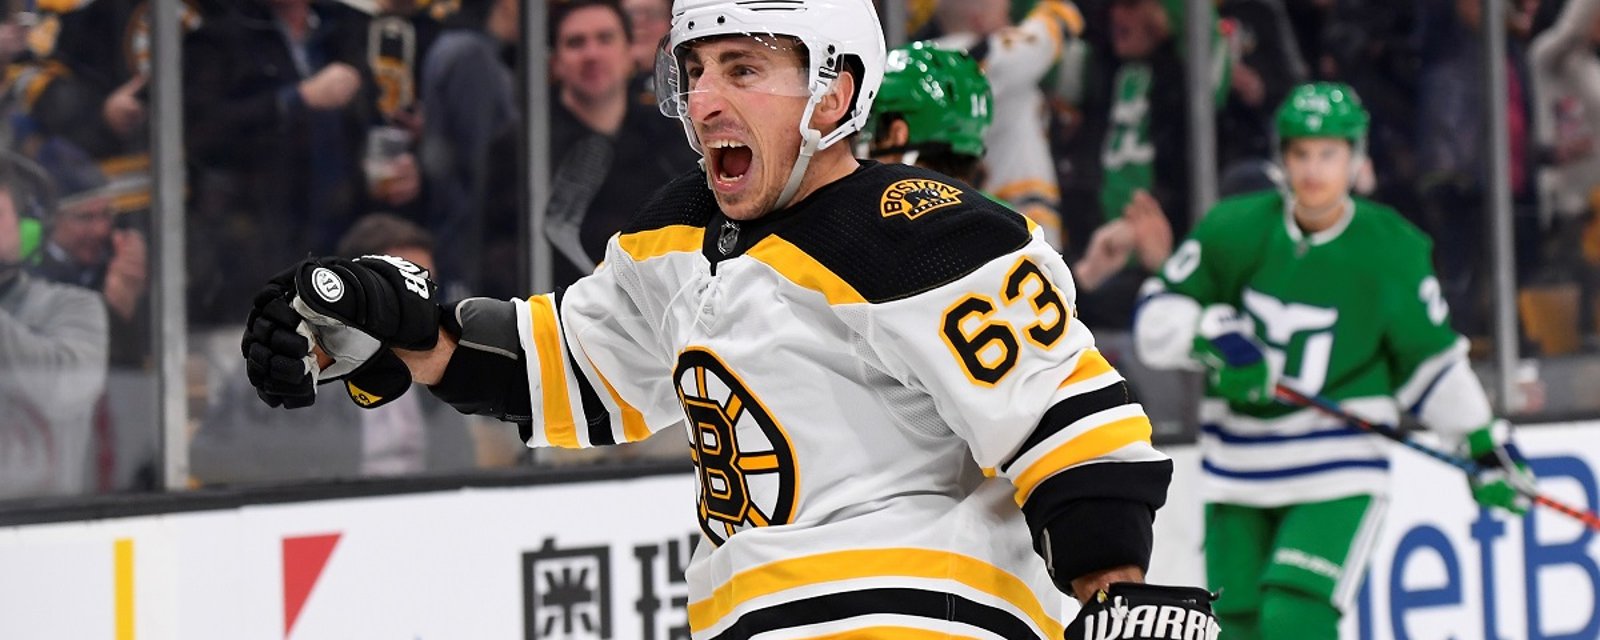 Brad Marchand once again taunts Toronto's fans after his victory “lap” on Friday.